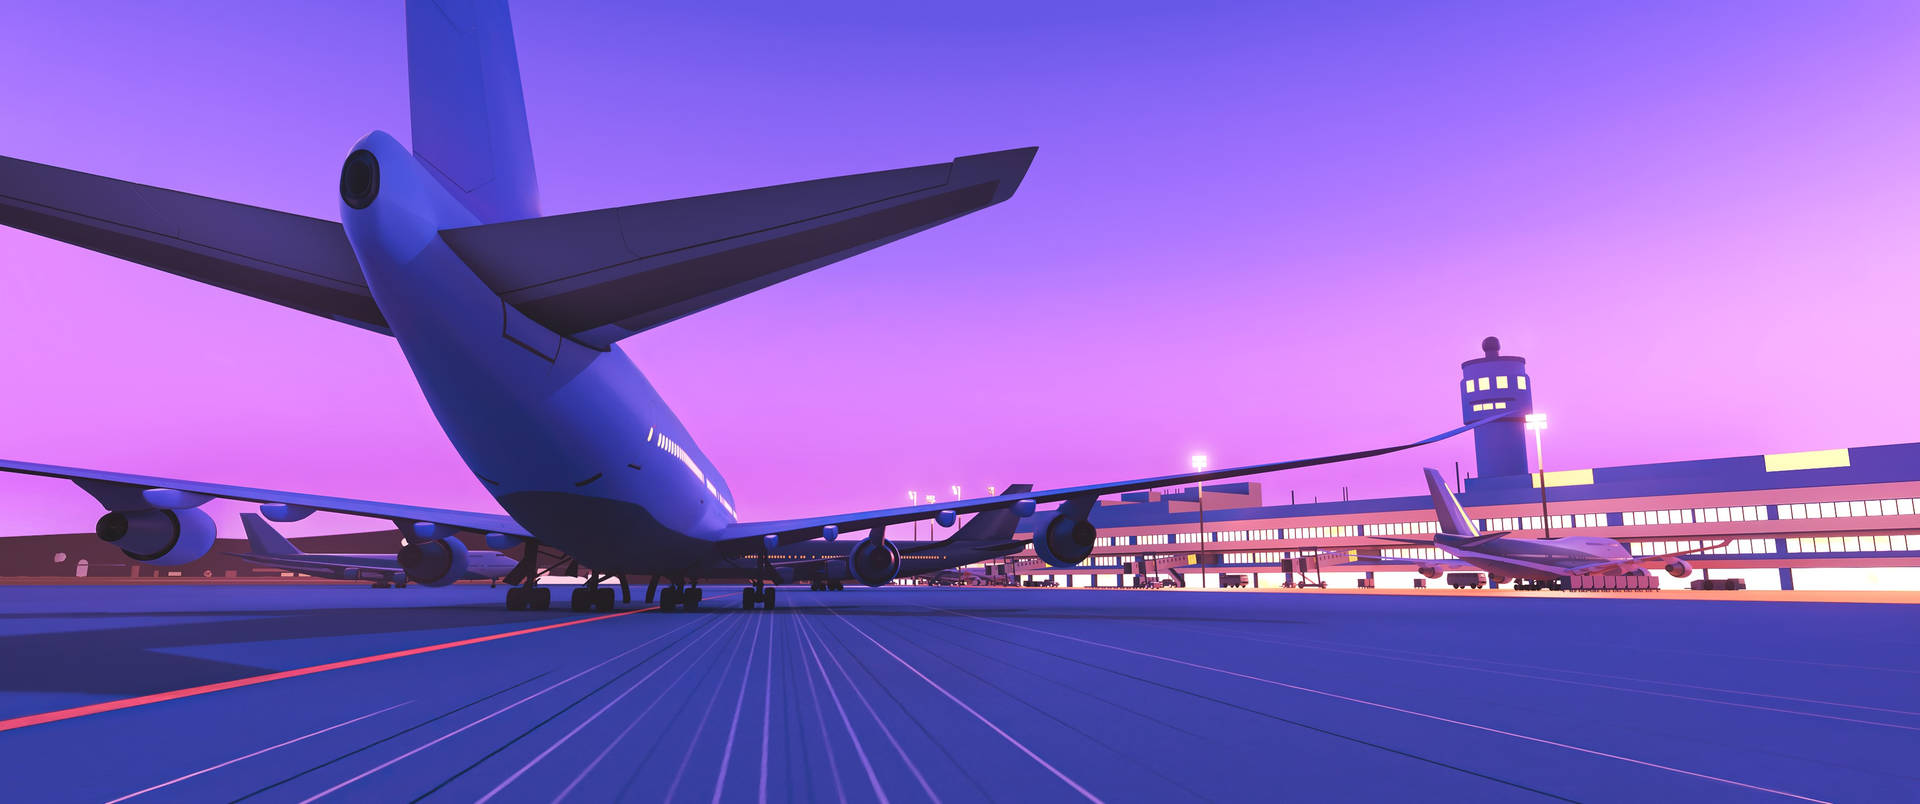 Airport With Blue Violet Sky Background